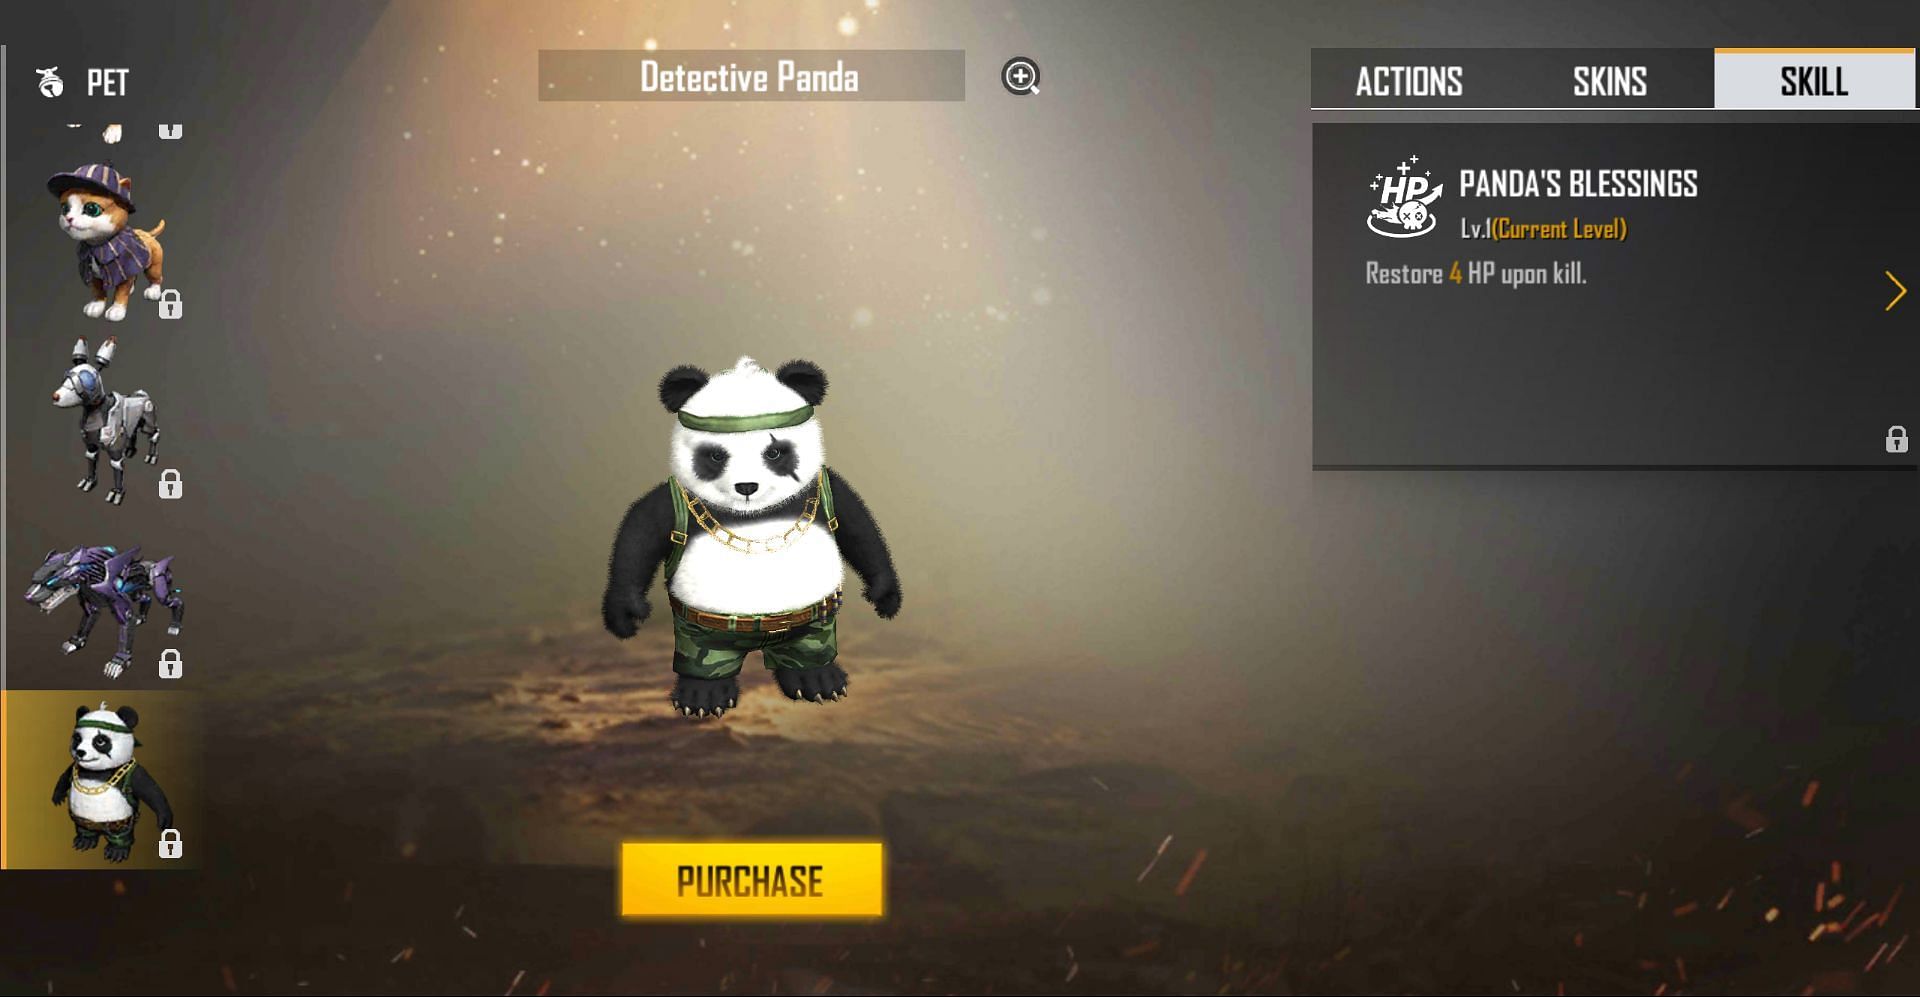 Detective Panda gets 10 HP at the highest level (Image via Free Fire)